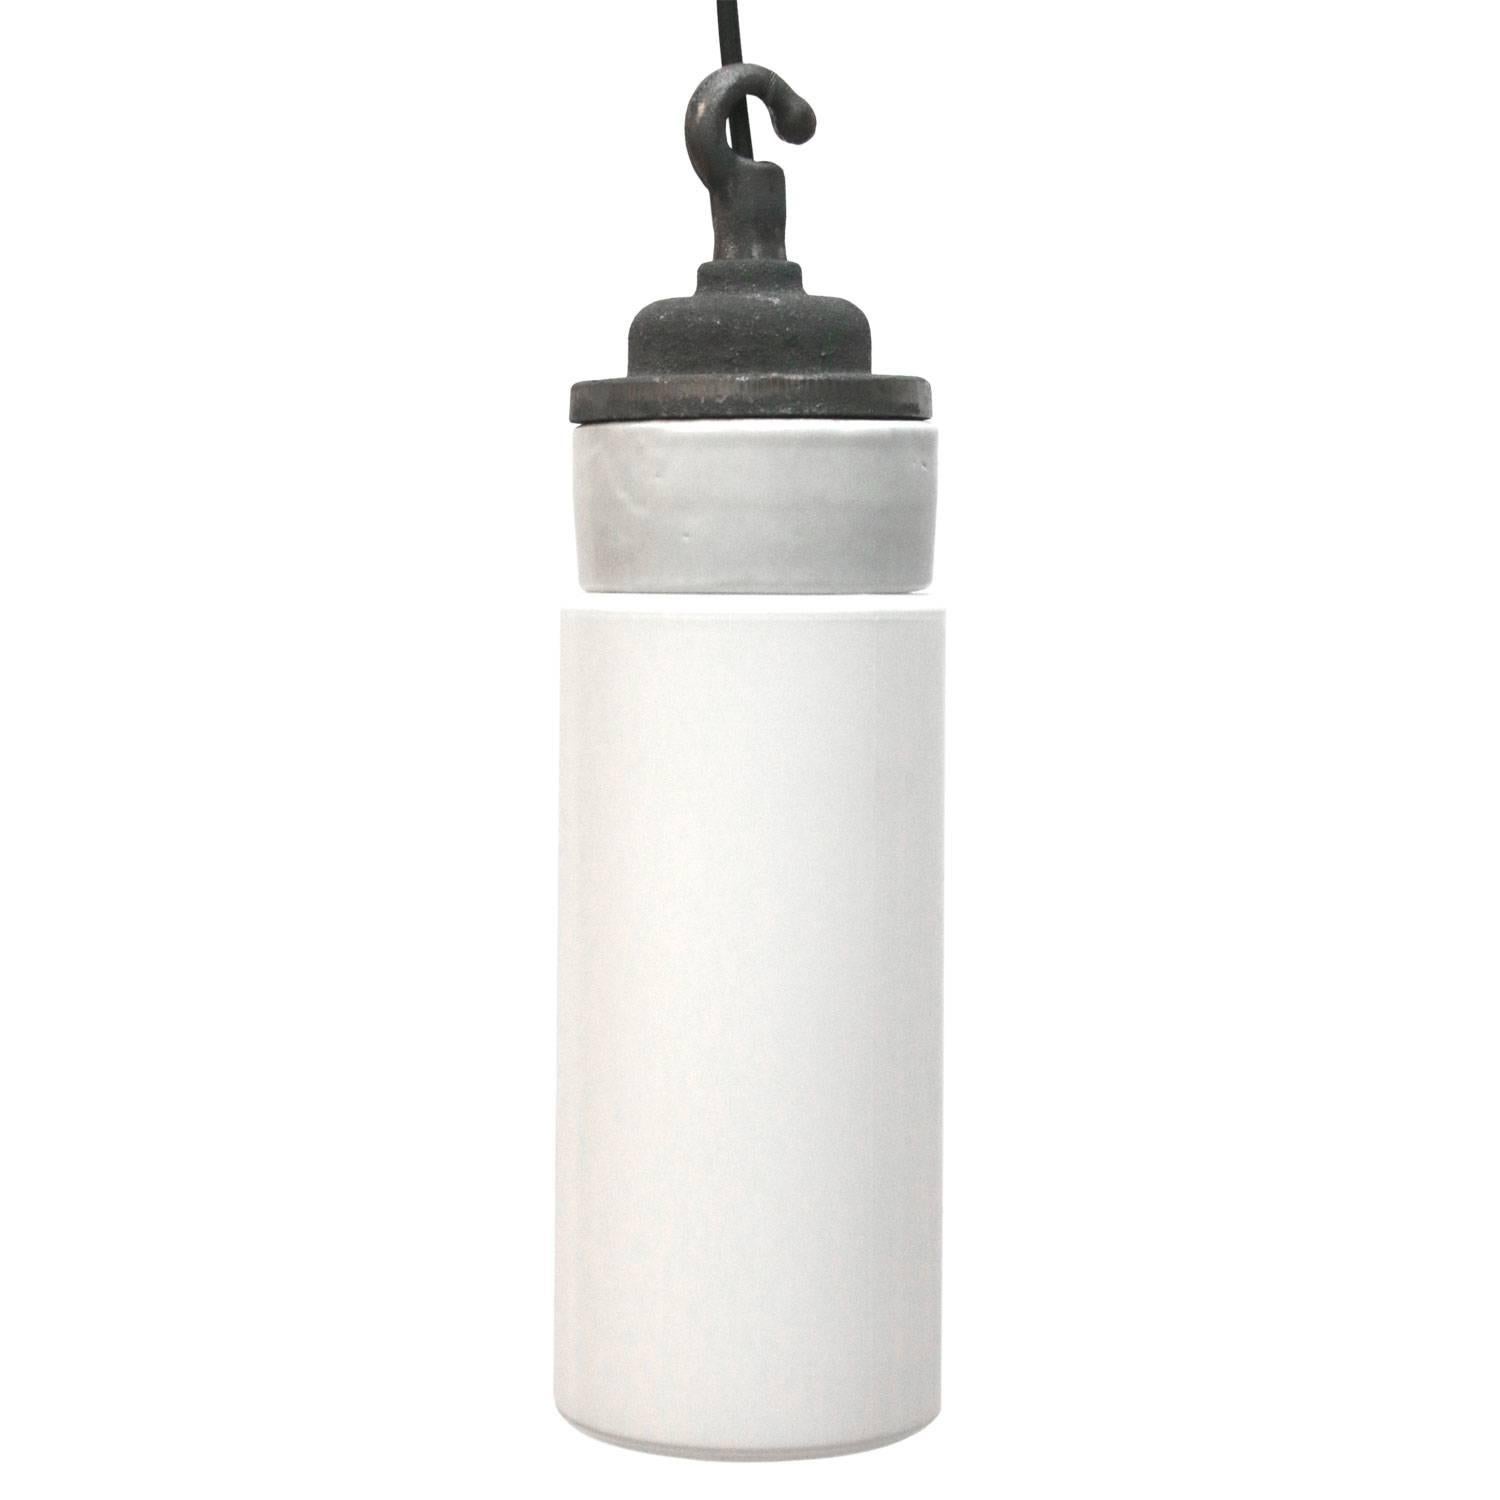 Porcelain industrial hanging lamp. White porcelain. Cast iron and opaline glass.
Two conductors. No ground.

Weight: 1.7 kg / 3.7 lb

All lamps have been made suitable by international standards for incandescent light bulbs, energy-efficient and LED